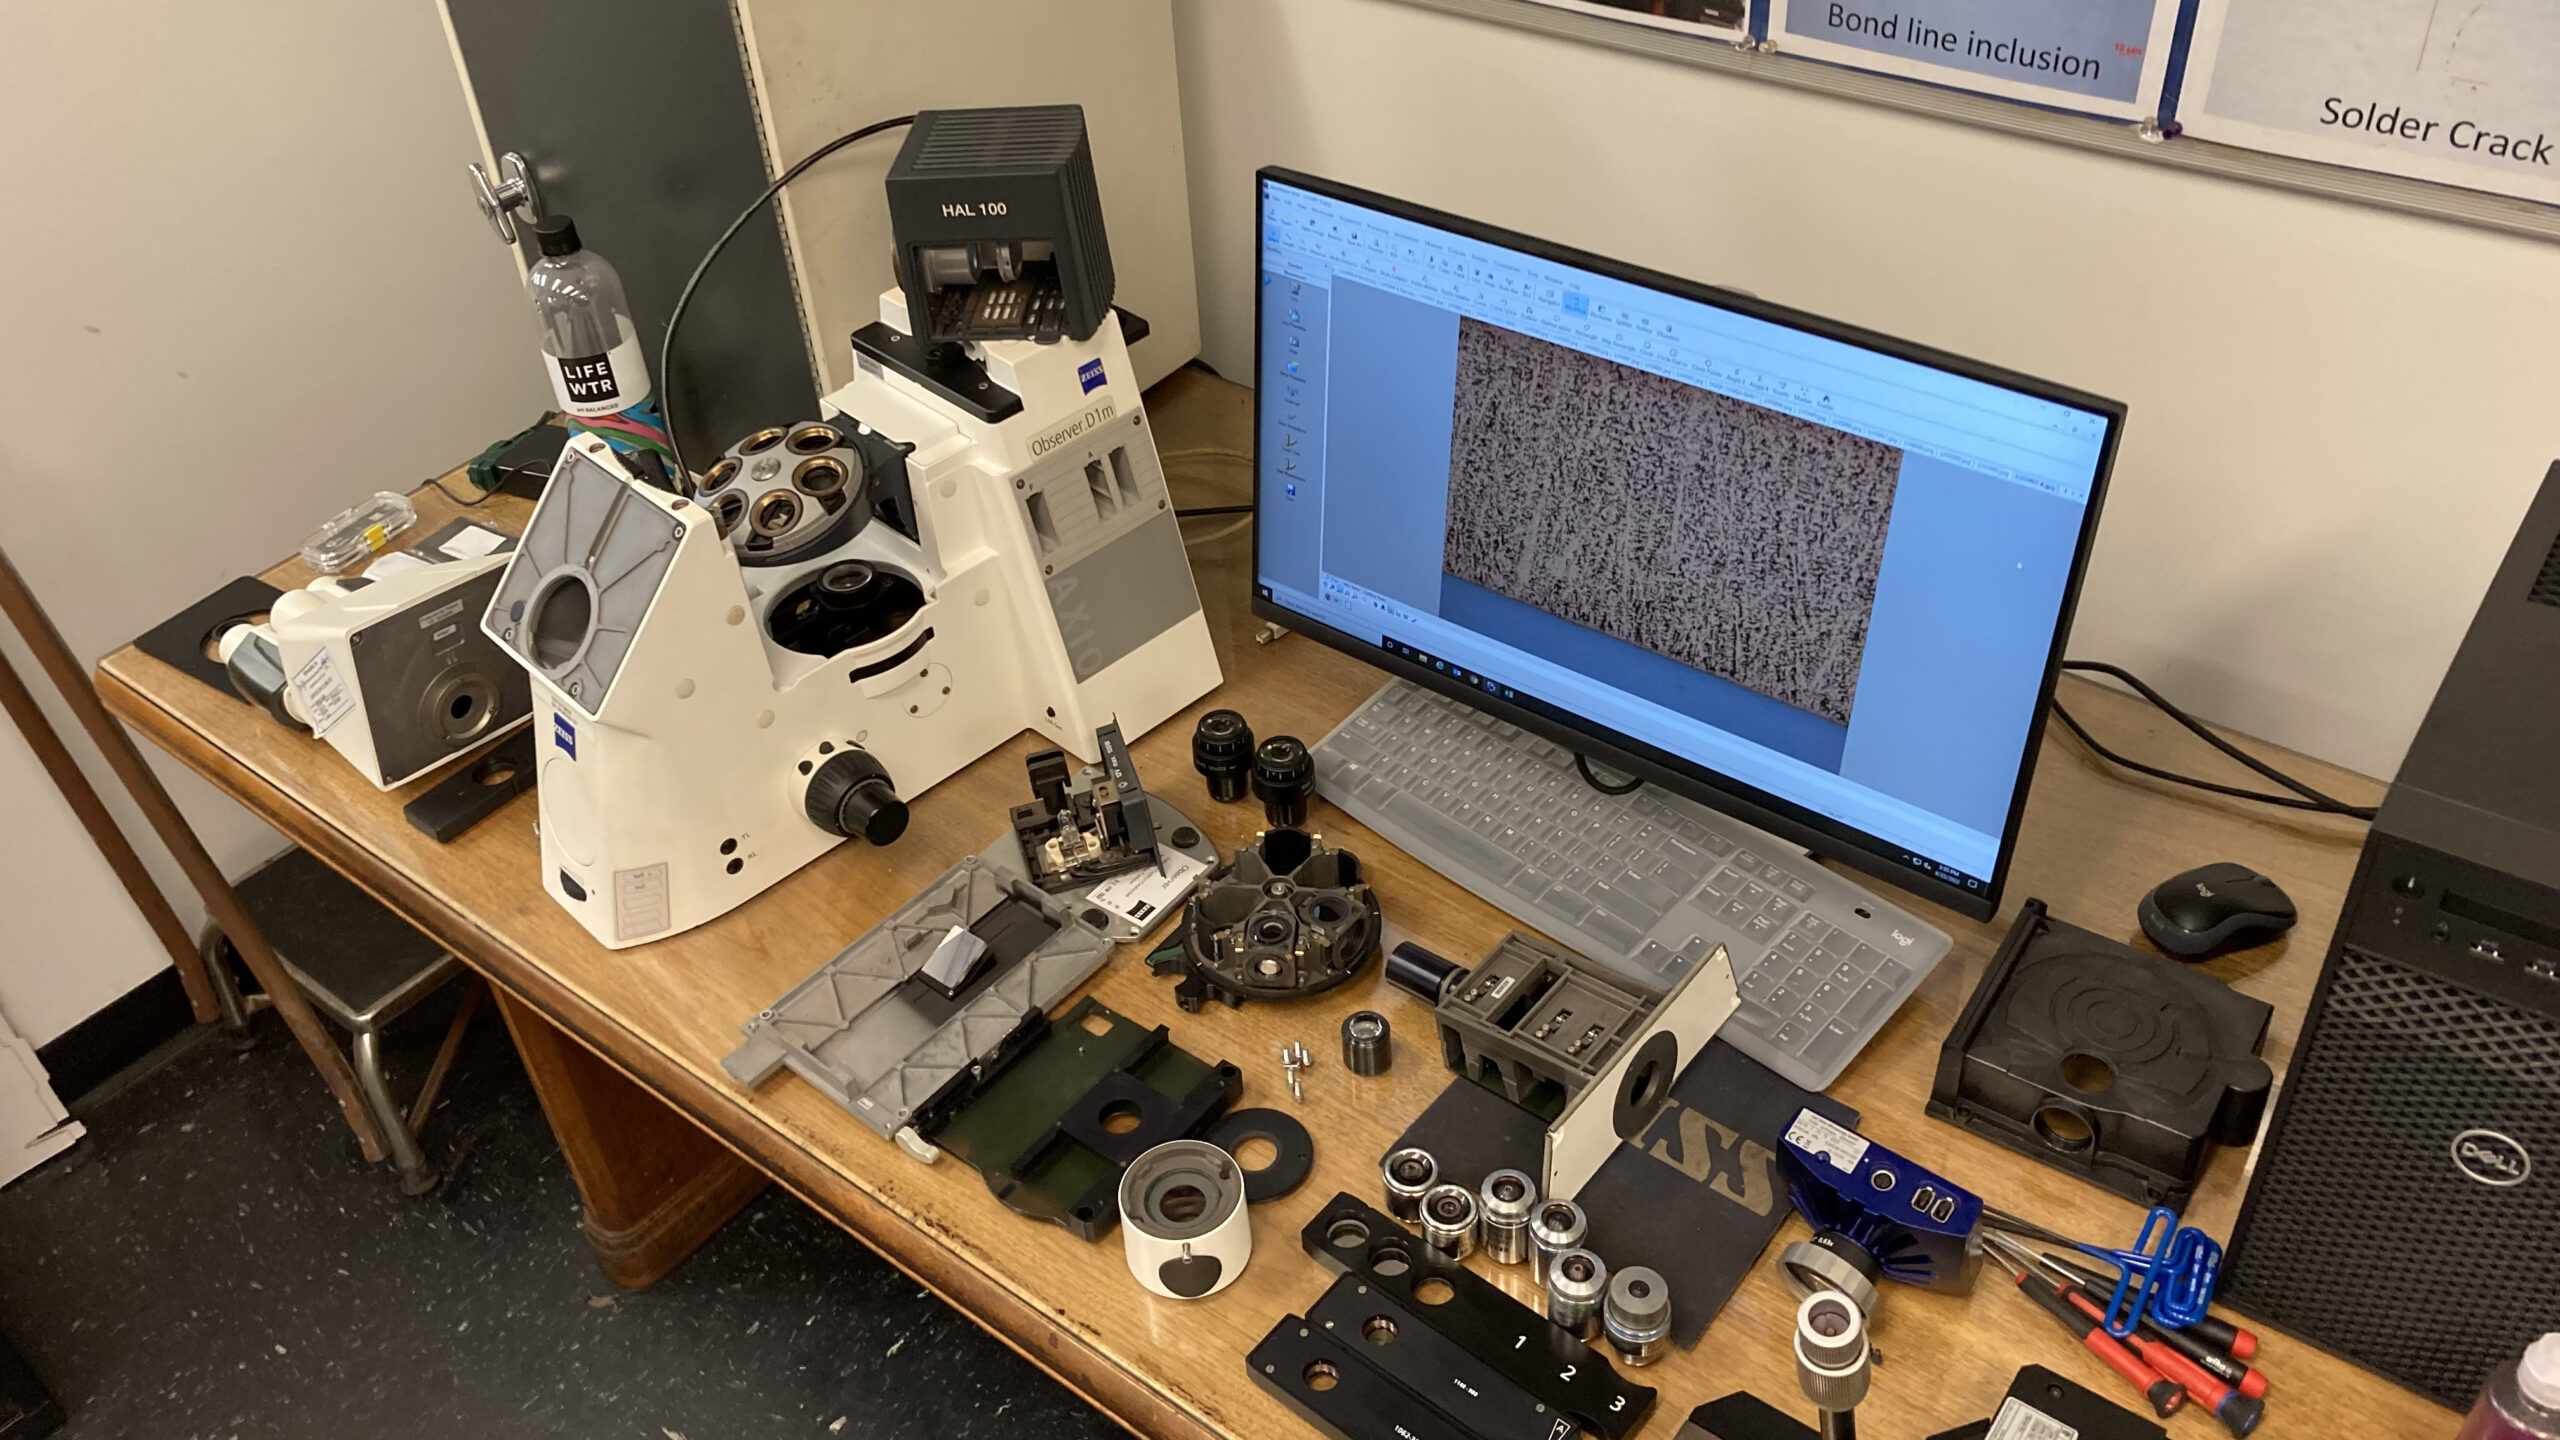 Zeiss Axio Observor Metallograph Microscope Profiler Comparator Linear Stage Cleaning and Calibration Accredited to 17025 Michigan, Ohio, Indiana, New York